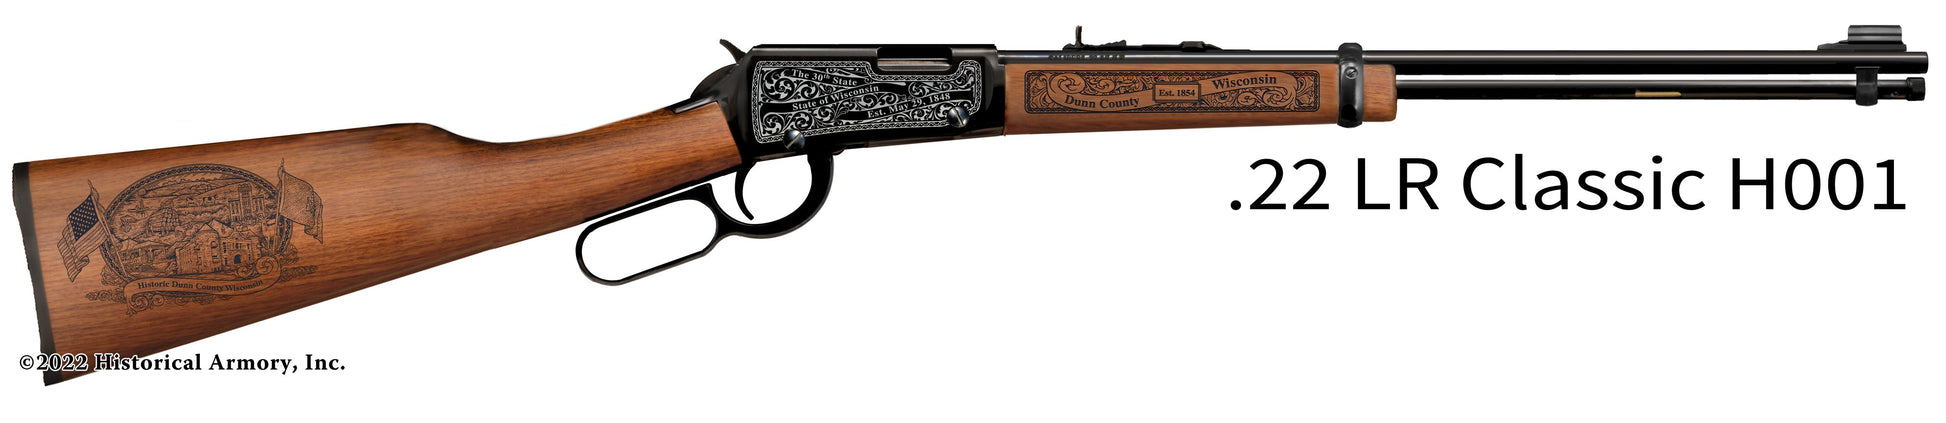 Dunn County Wisconsin Engraved Henry H001 Rifle